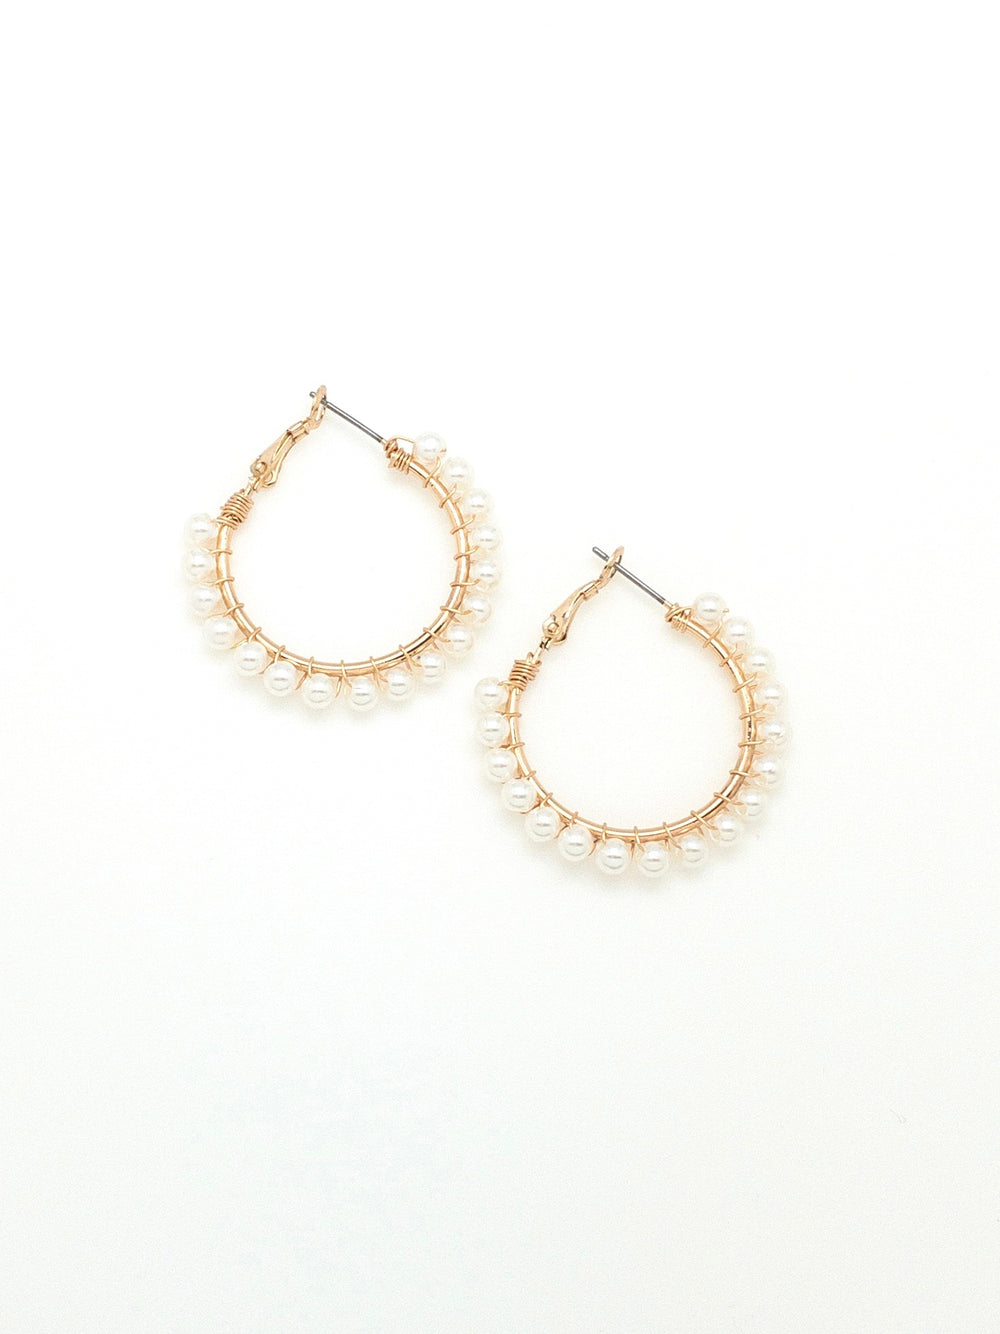 gold hoops with wire wrapped pearls on them